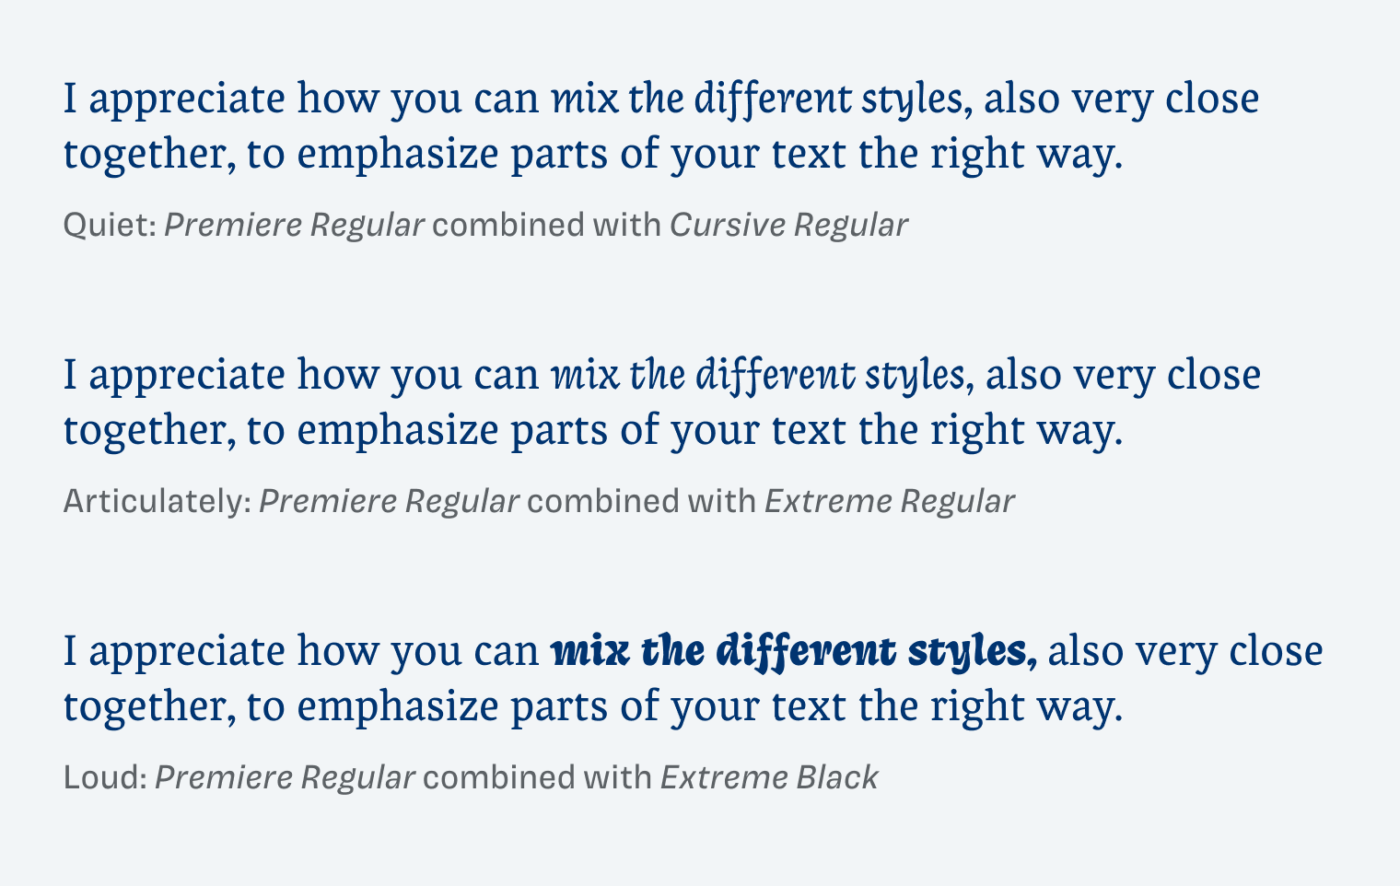 I appreciate how you can mix the different styles, also very close together, to emphasize parts of your text the right way. Quiet: Premiere Regular combined with Cursive Regular. Articulately: Premiere Regular combined with Extreme Regular. Loud: Premiere Regular combined with Extreme Black.